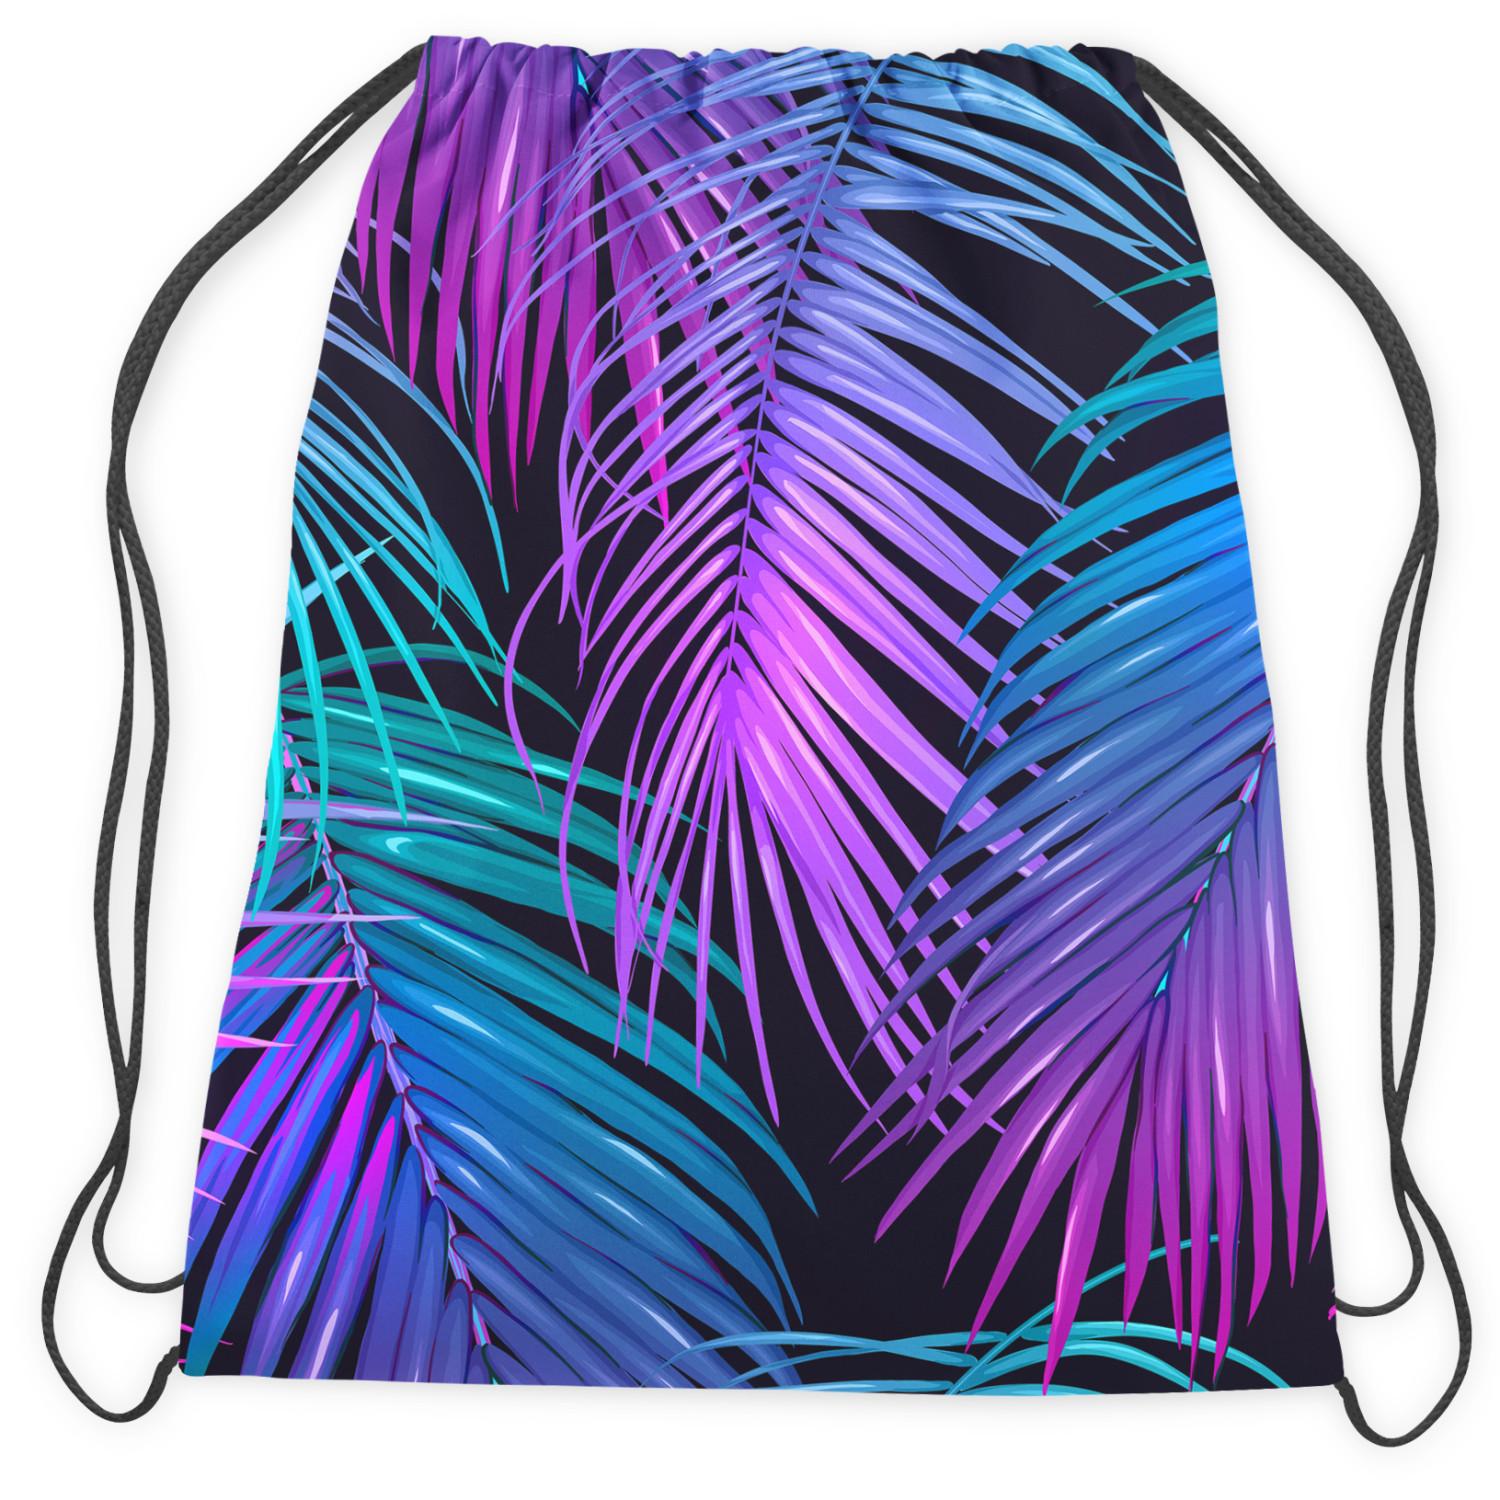 Backpack Neon palm trees - floral motif in shades of turquoise and purple